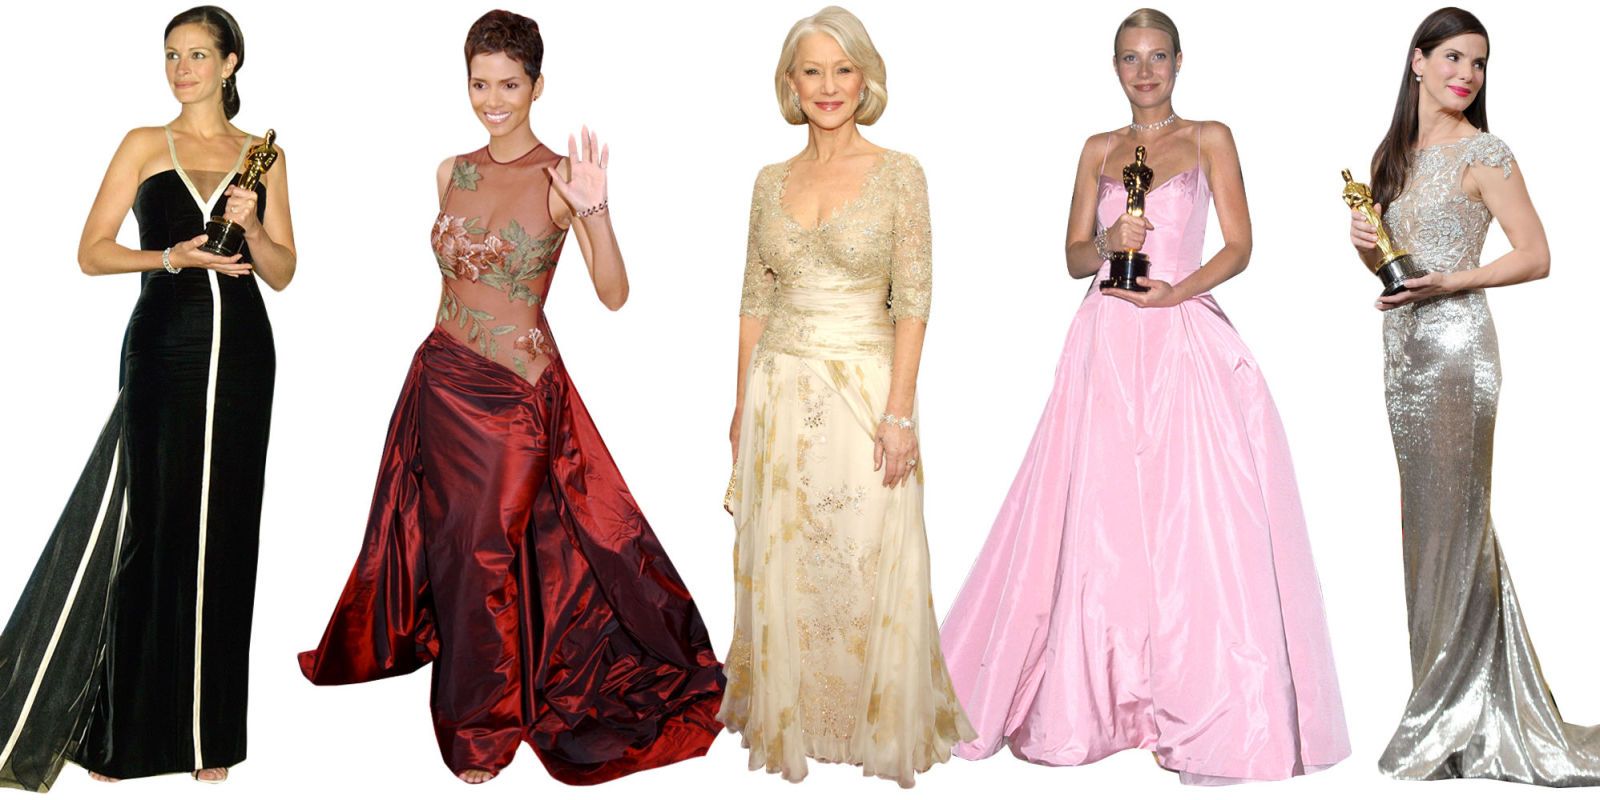 12 Ugliest Celebrity Gowns| Entertainment